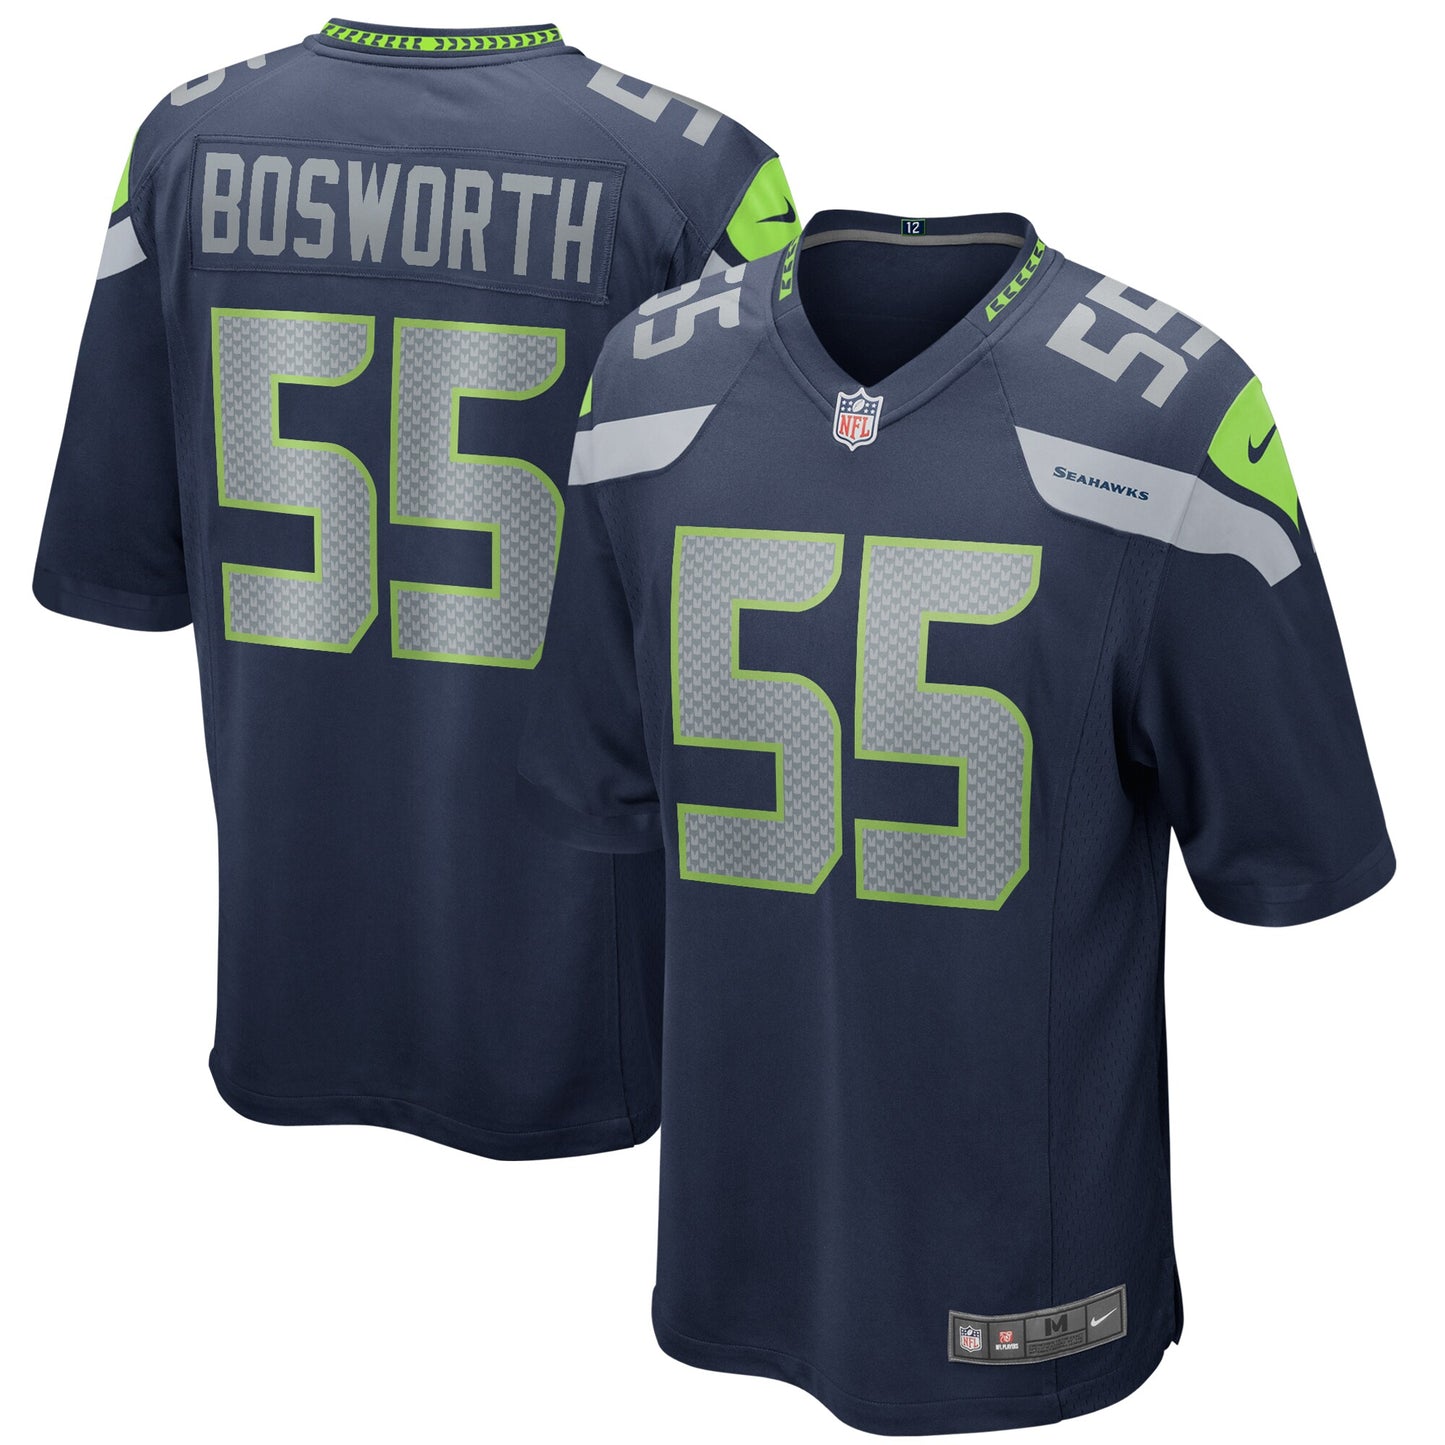 Brian Bosworth Seattle Seahawks Nike Game Retired Player Jersey - College Navy